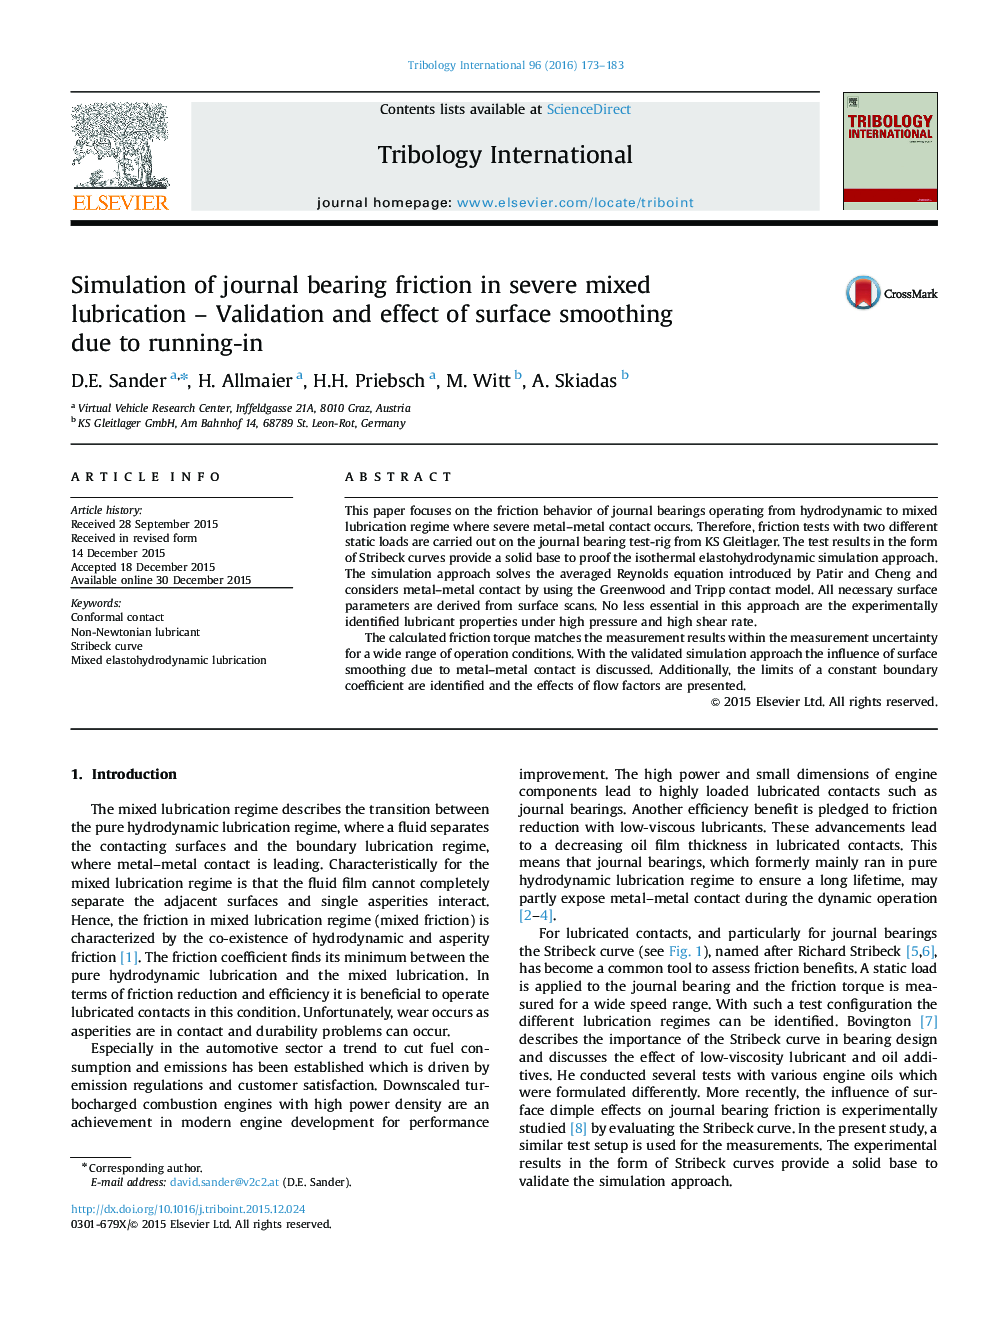 Simulation of journal bearing friction in severe mixed lubrication – Validation and effect of surface smoothing due to running-in